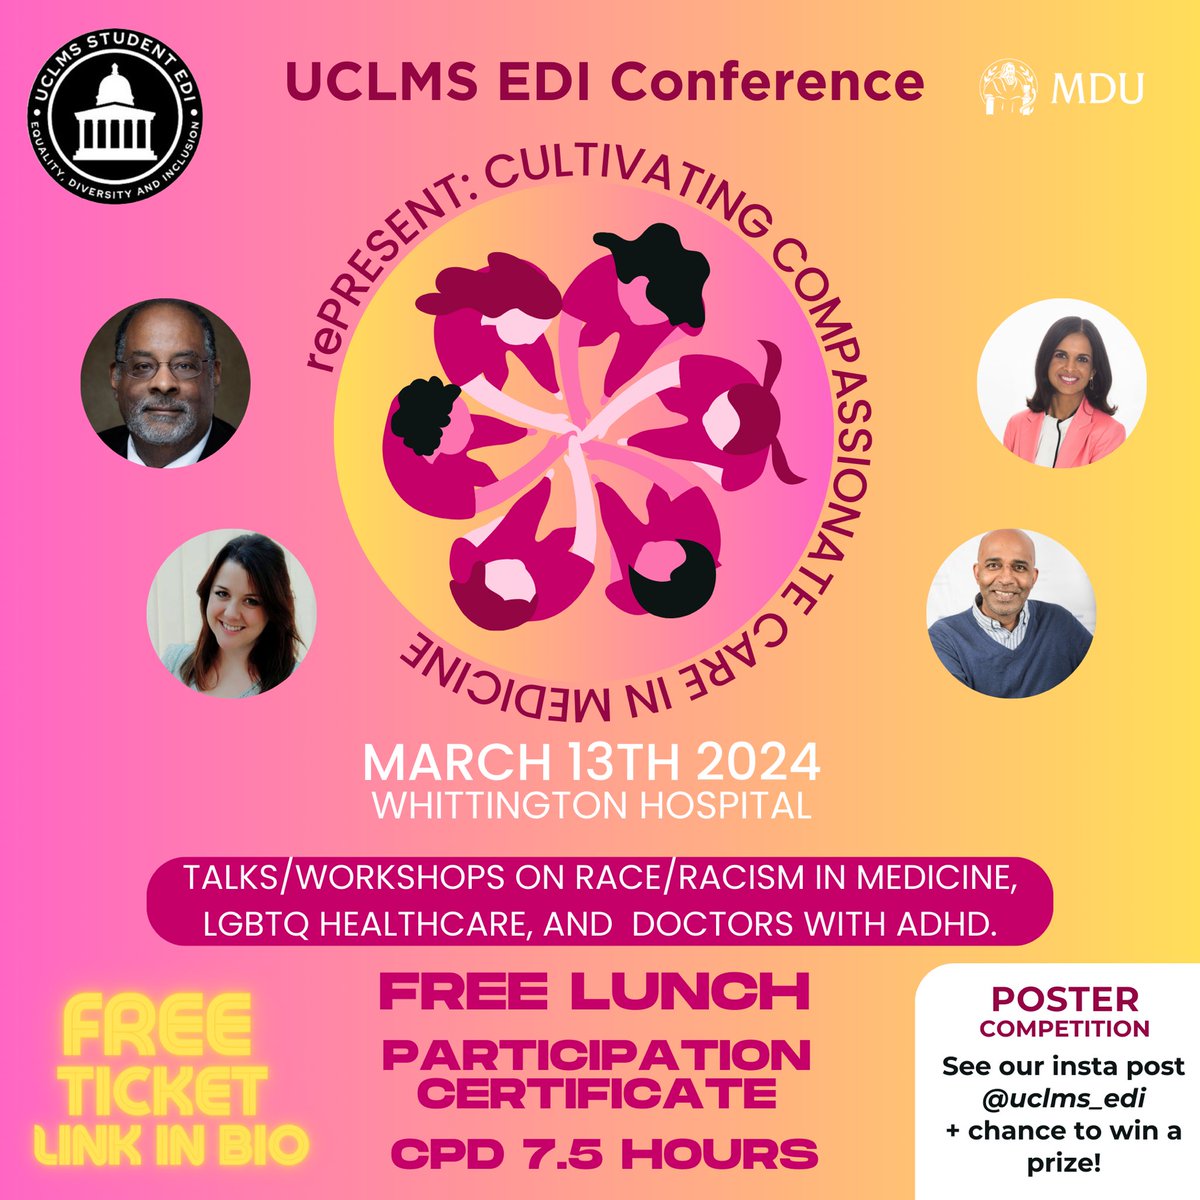 Please join us on March 13th for UCLMS’s EDI committee’s first ever conference! Hear from world leading speakers and take part in eye-opening workshops! Grab your free tickets by following the link the bio!